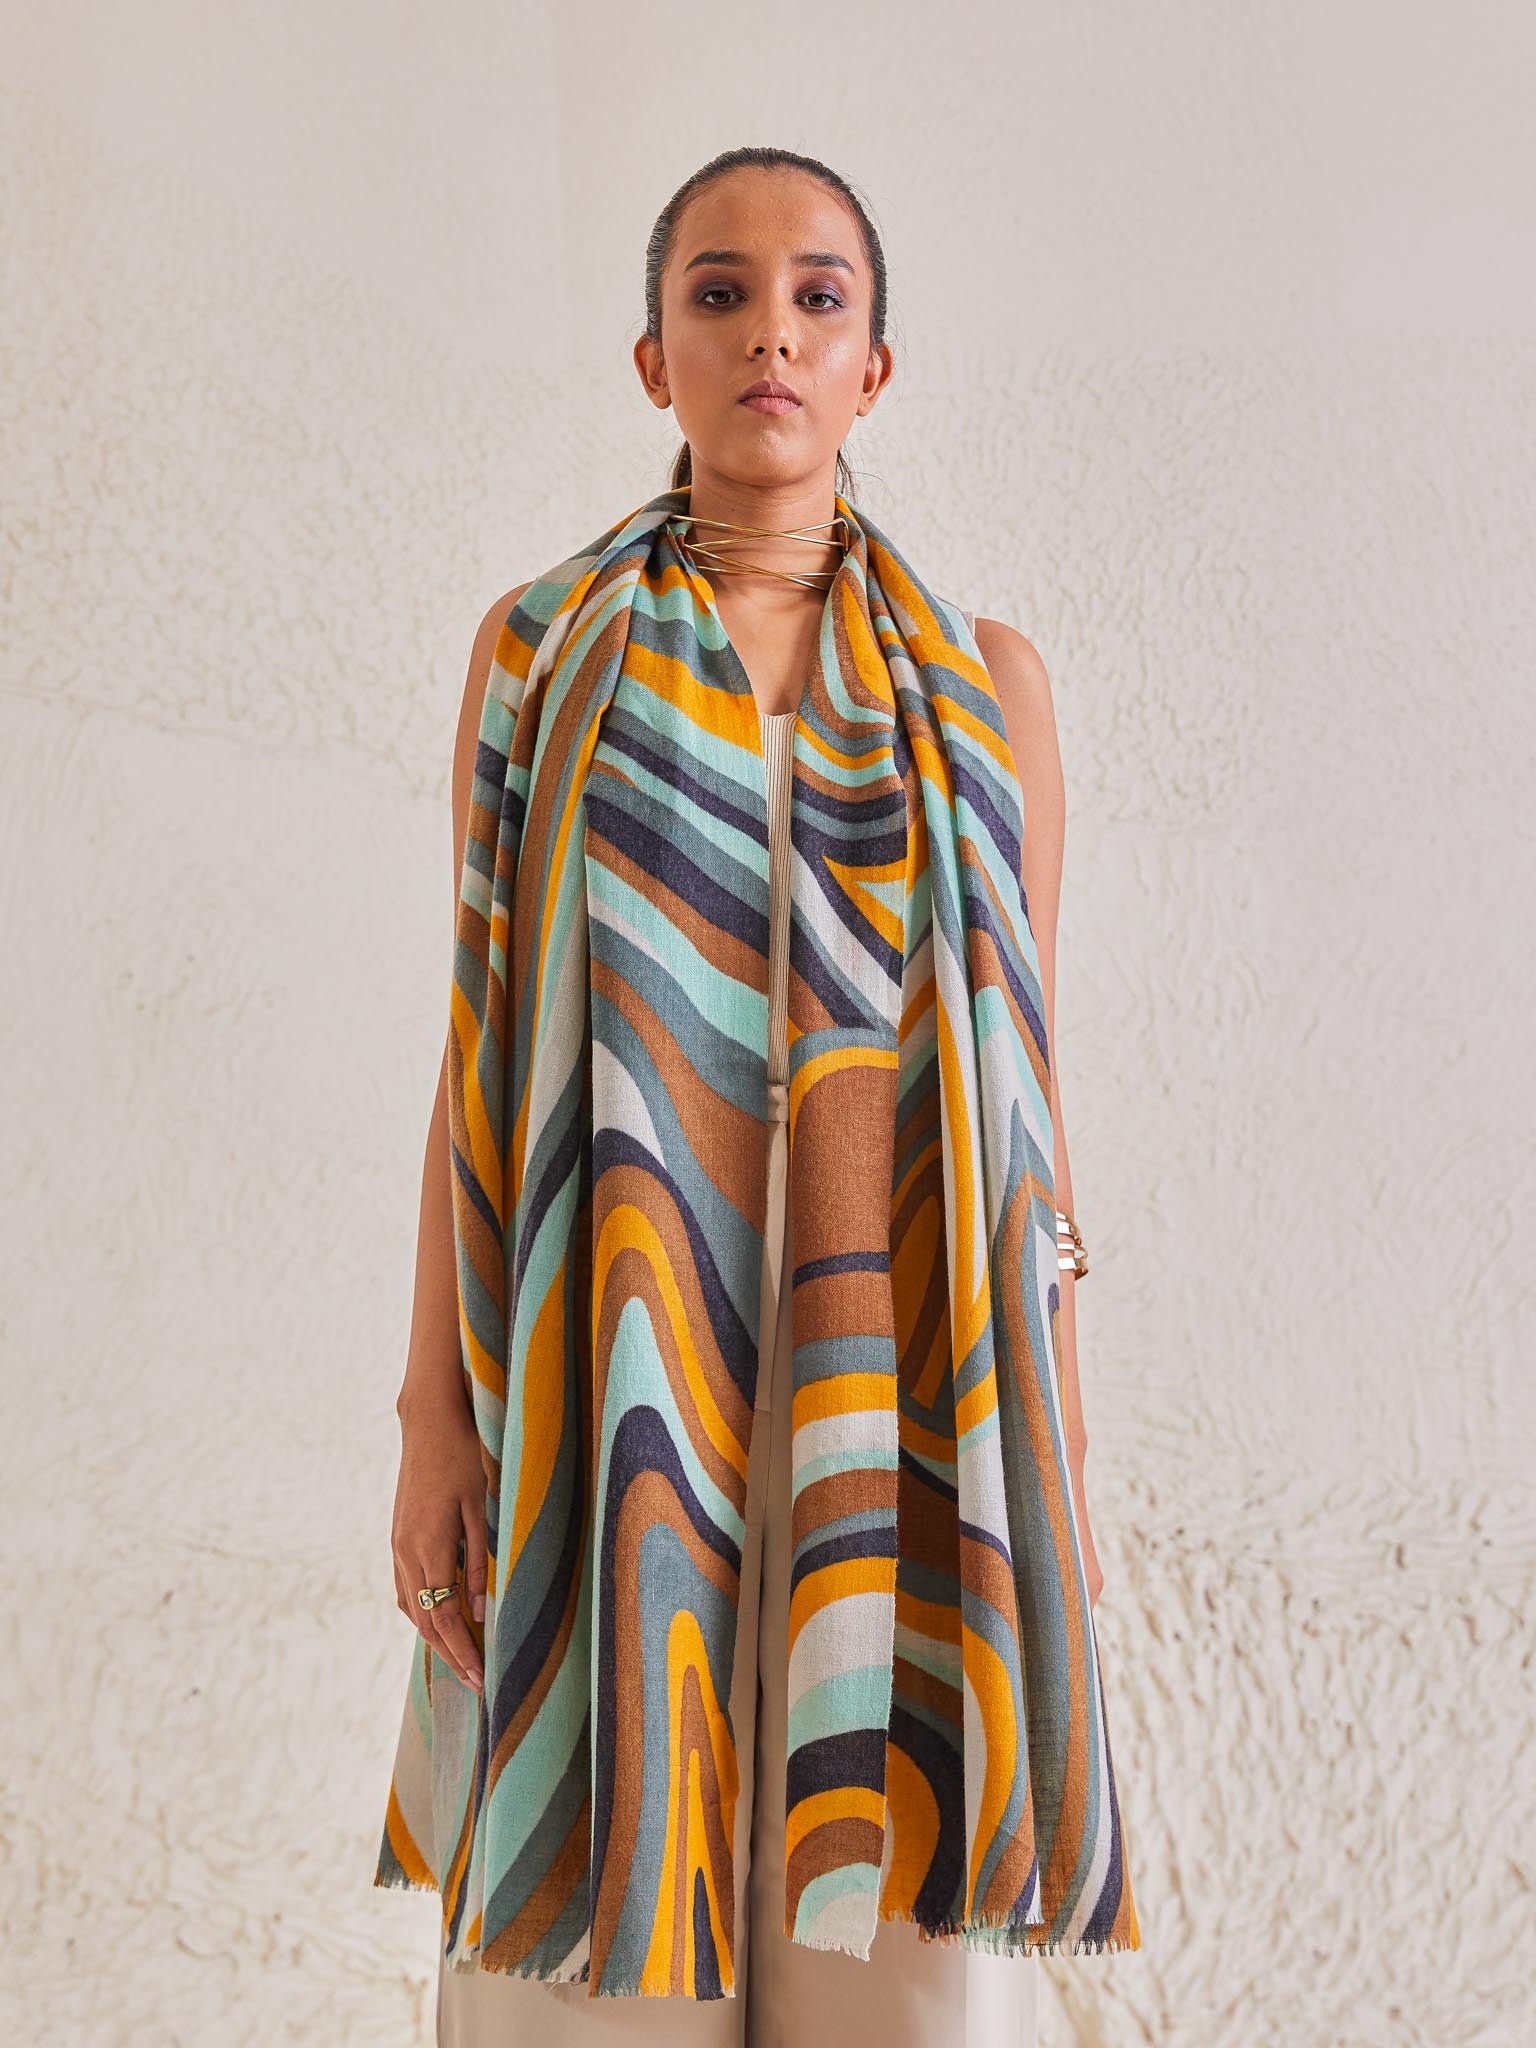 Model is wearing the disruption pashmina stole from shaza, handpainted in colours of brown, ochre and blue symbolizing Earth.